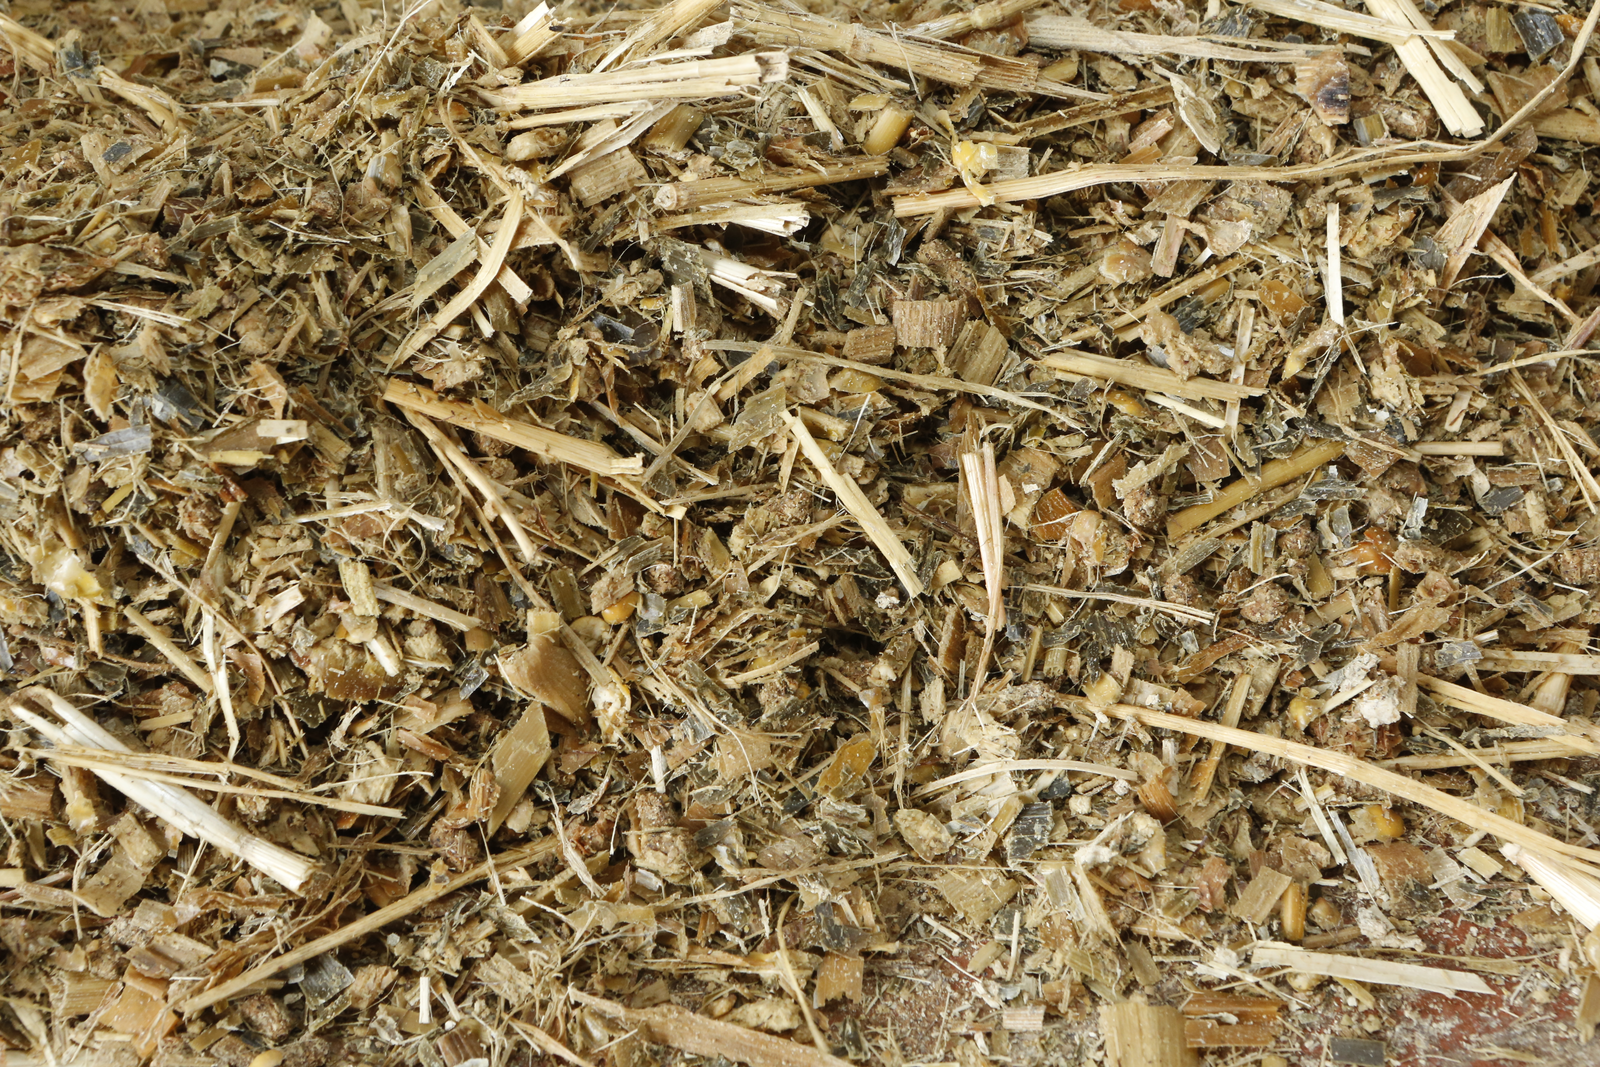 The effect of longer chopped silage in feedlot cattle